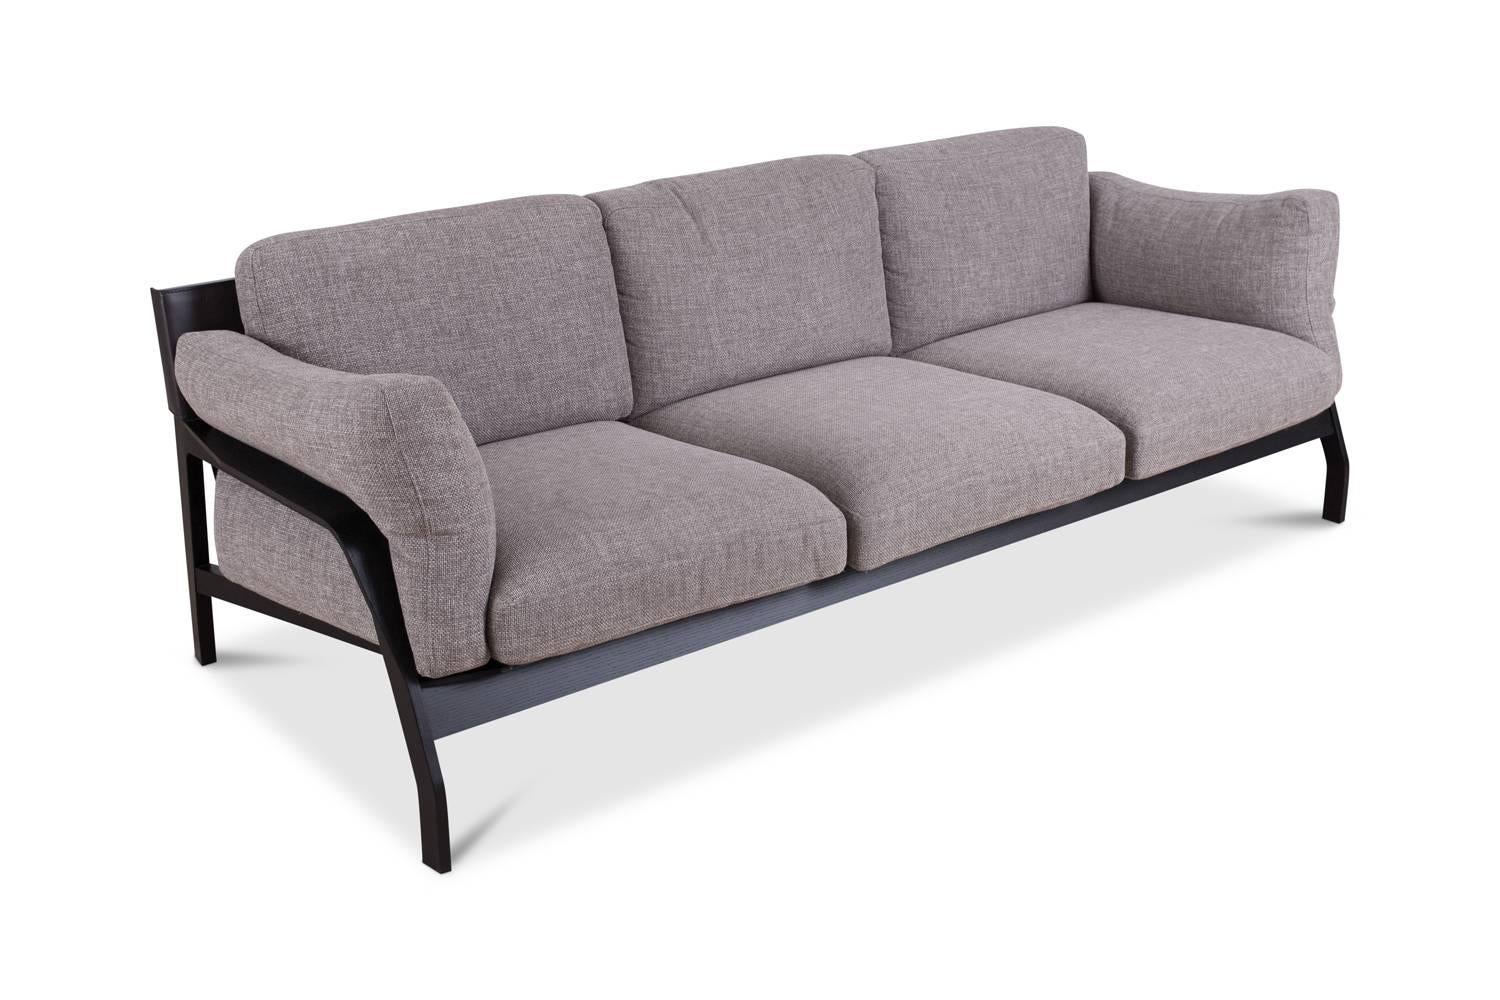 The Cassina 285 Eloro three-seat sofa was designed by Rodolfo Dordoni in 2008.
A contemporary design classic, its soft form gives life to a sofa balanced between spontaneity and refinement.
Three seat and three back cushions
Material: Leather